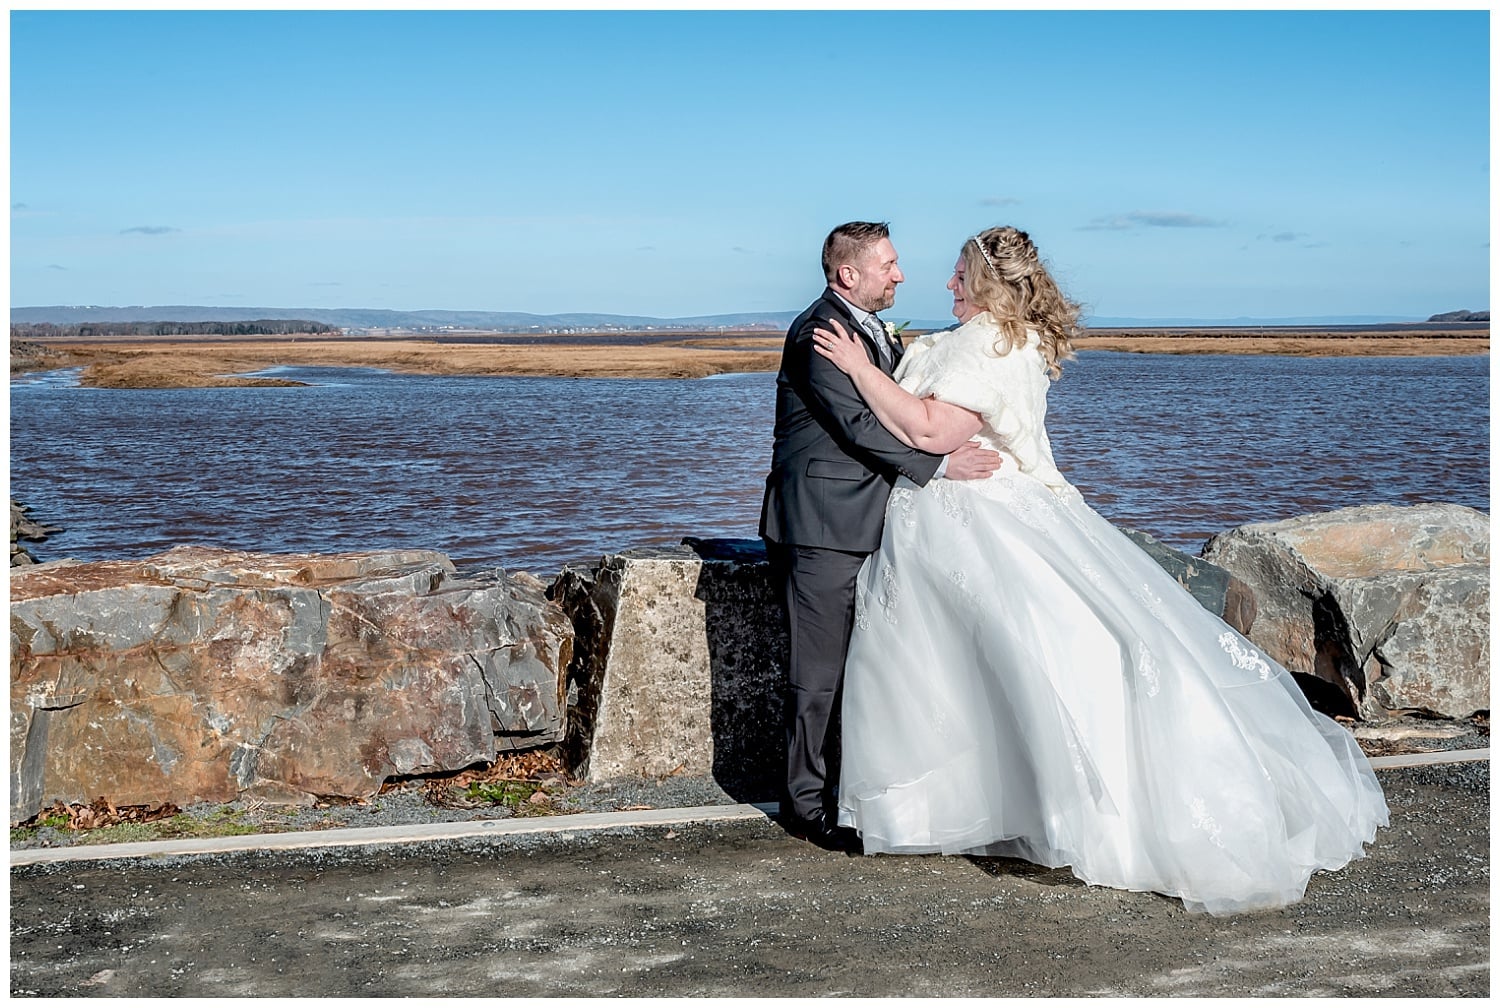 The bride and groom pose for wedding photos on the ocean behind the Wolfville Chapel in Nova Scotia.